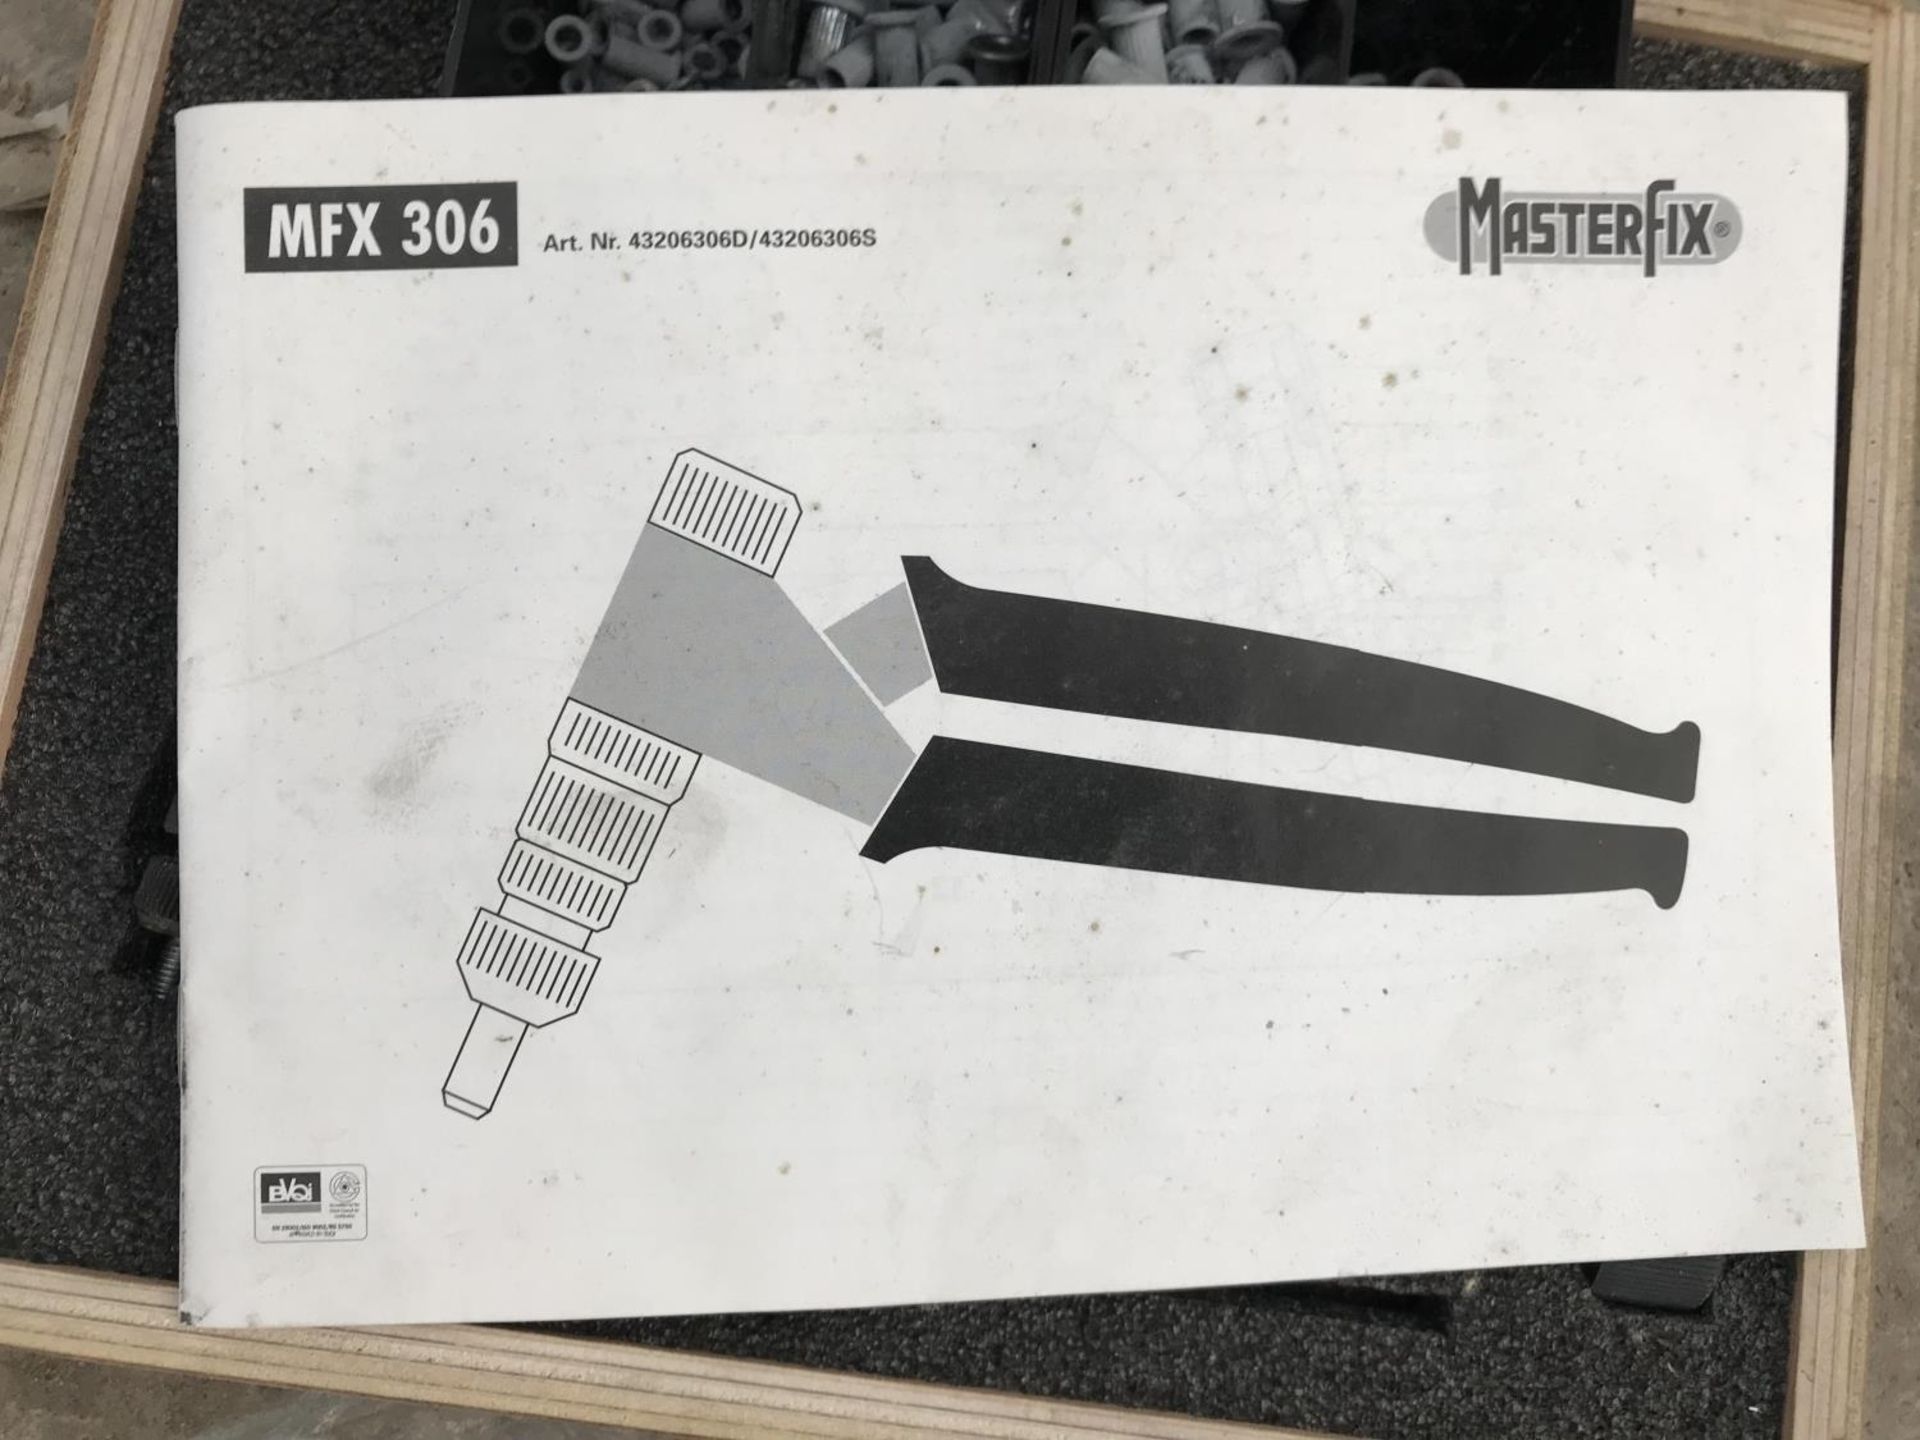 A MASTERFIX BLIND RIVETER - MODEL MFX 306 AS NEW WITH CASE AND INSTRUCTION MANUAL - SOLD IN - Image 3 of 3